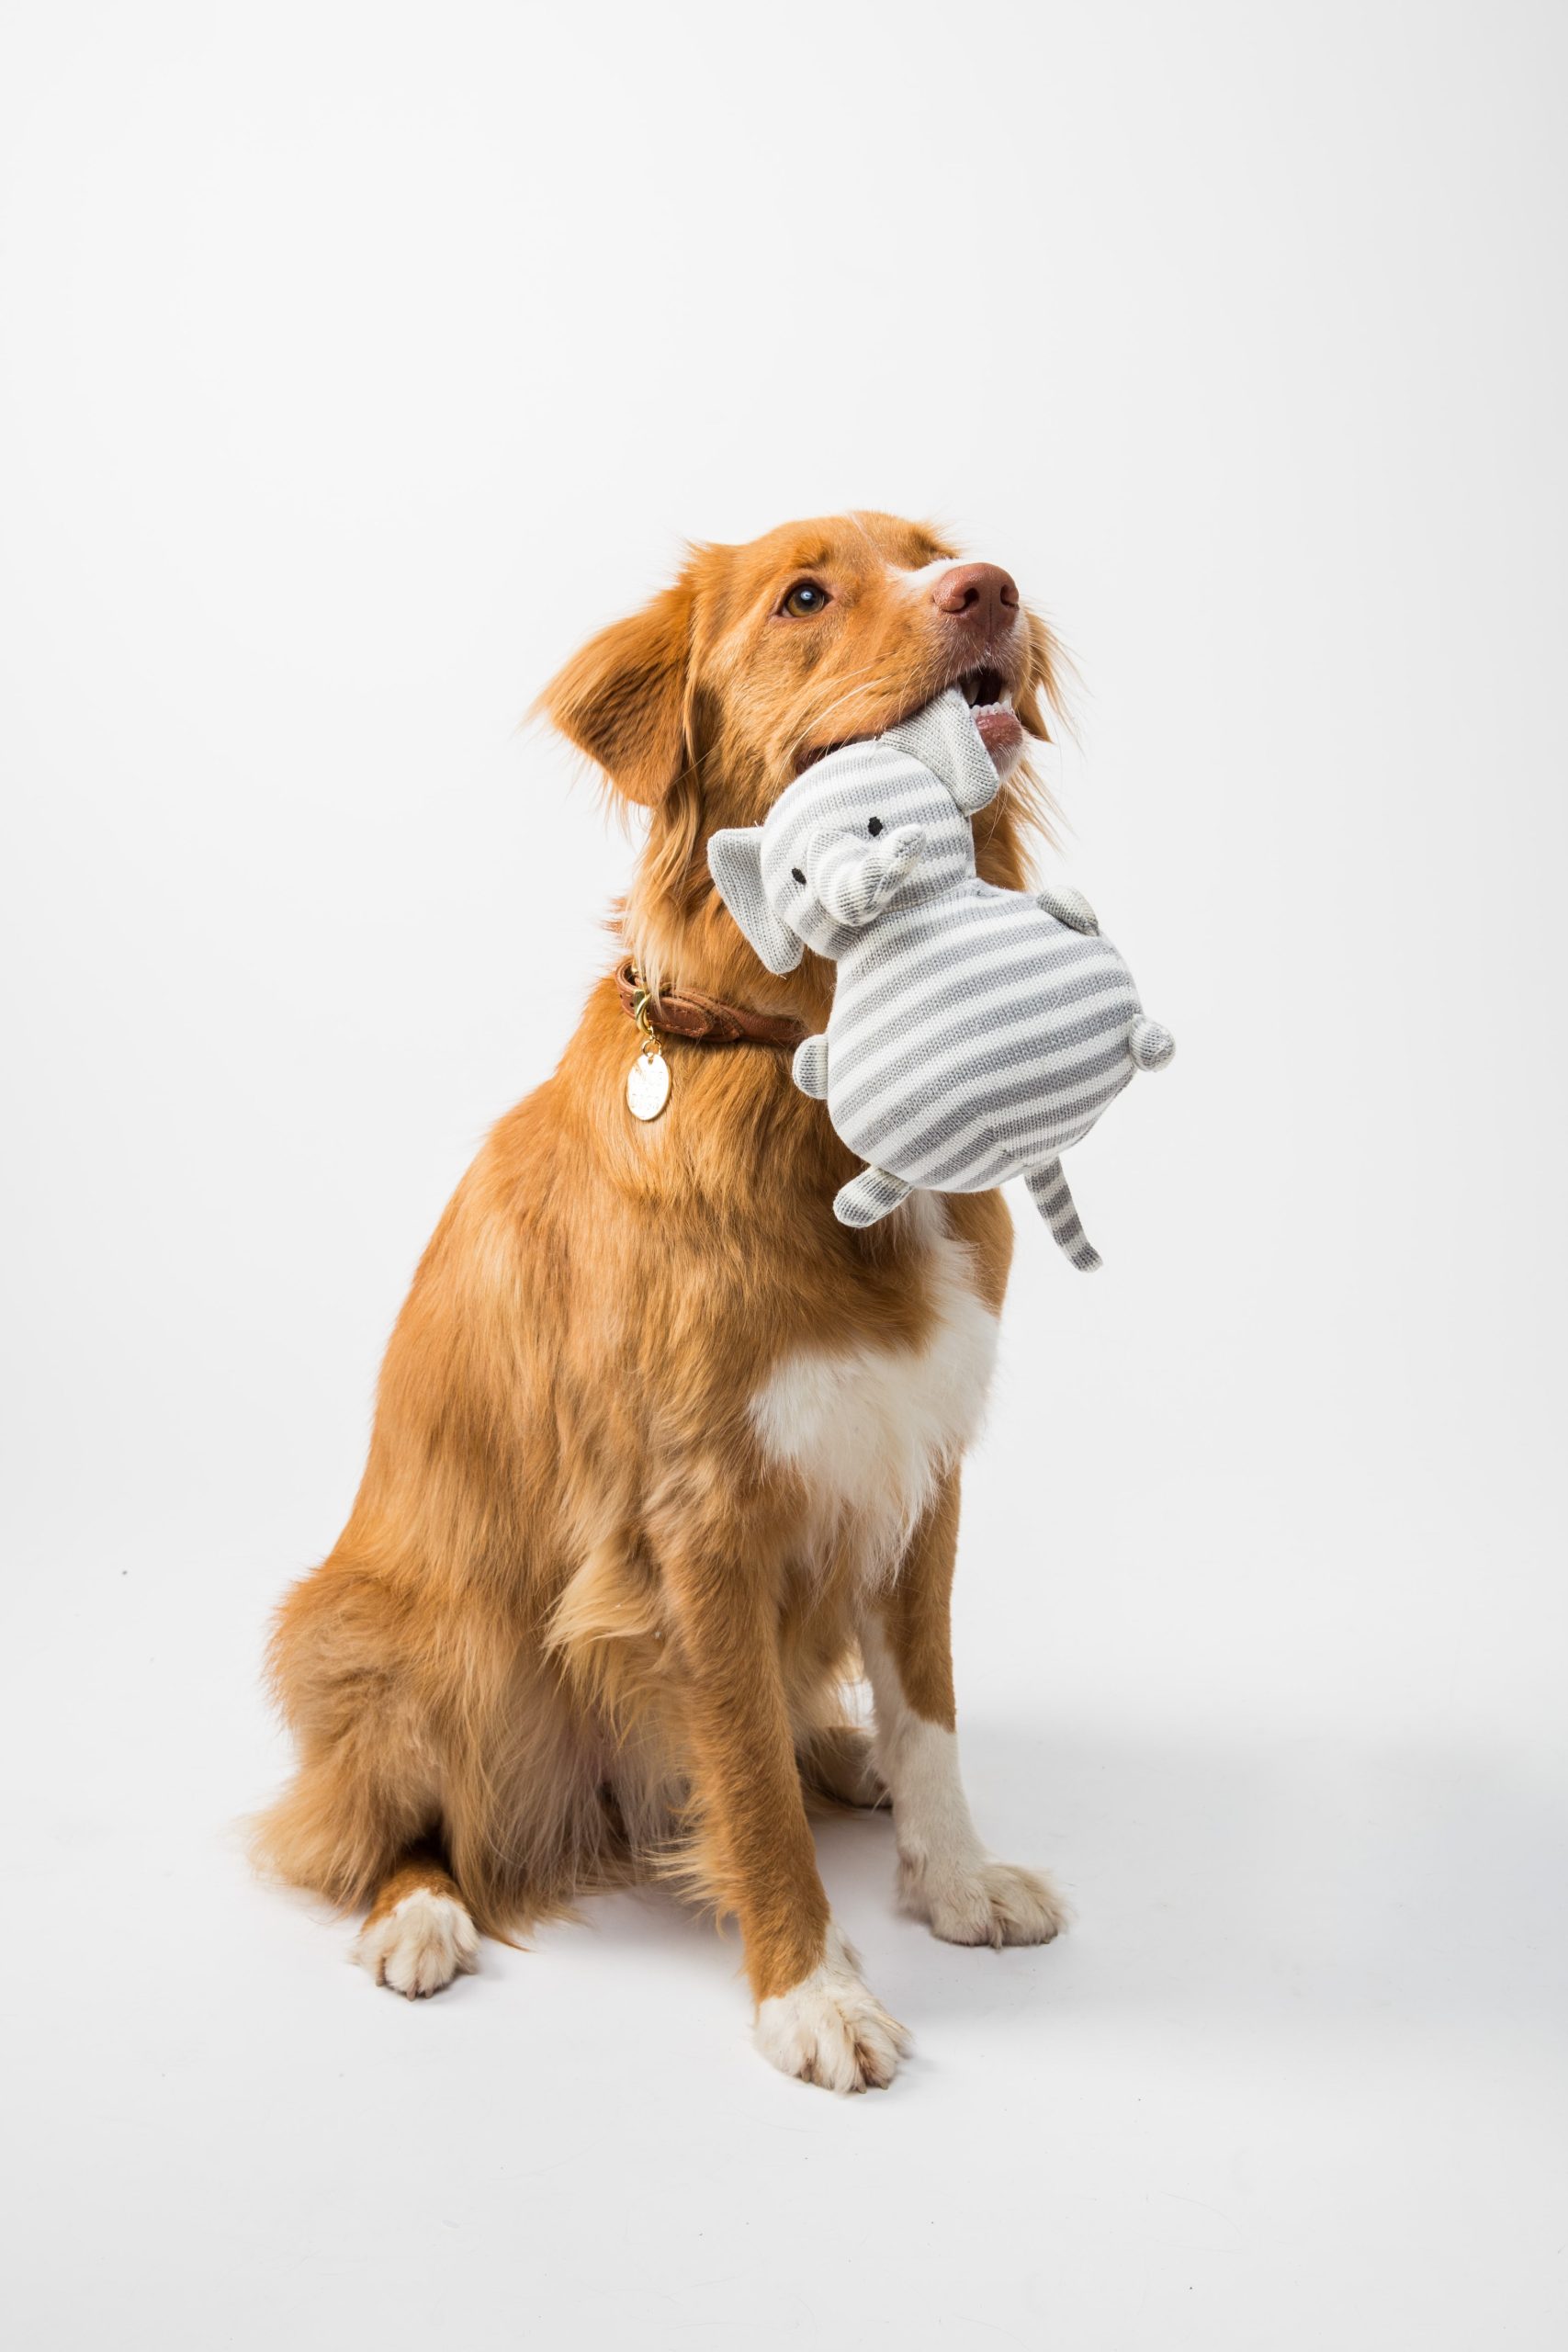 The Truth About Urinary Tract Infections in Dogs